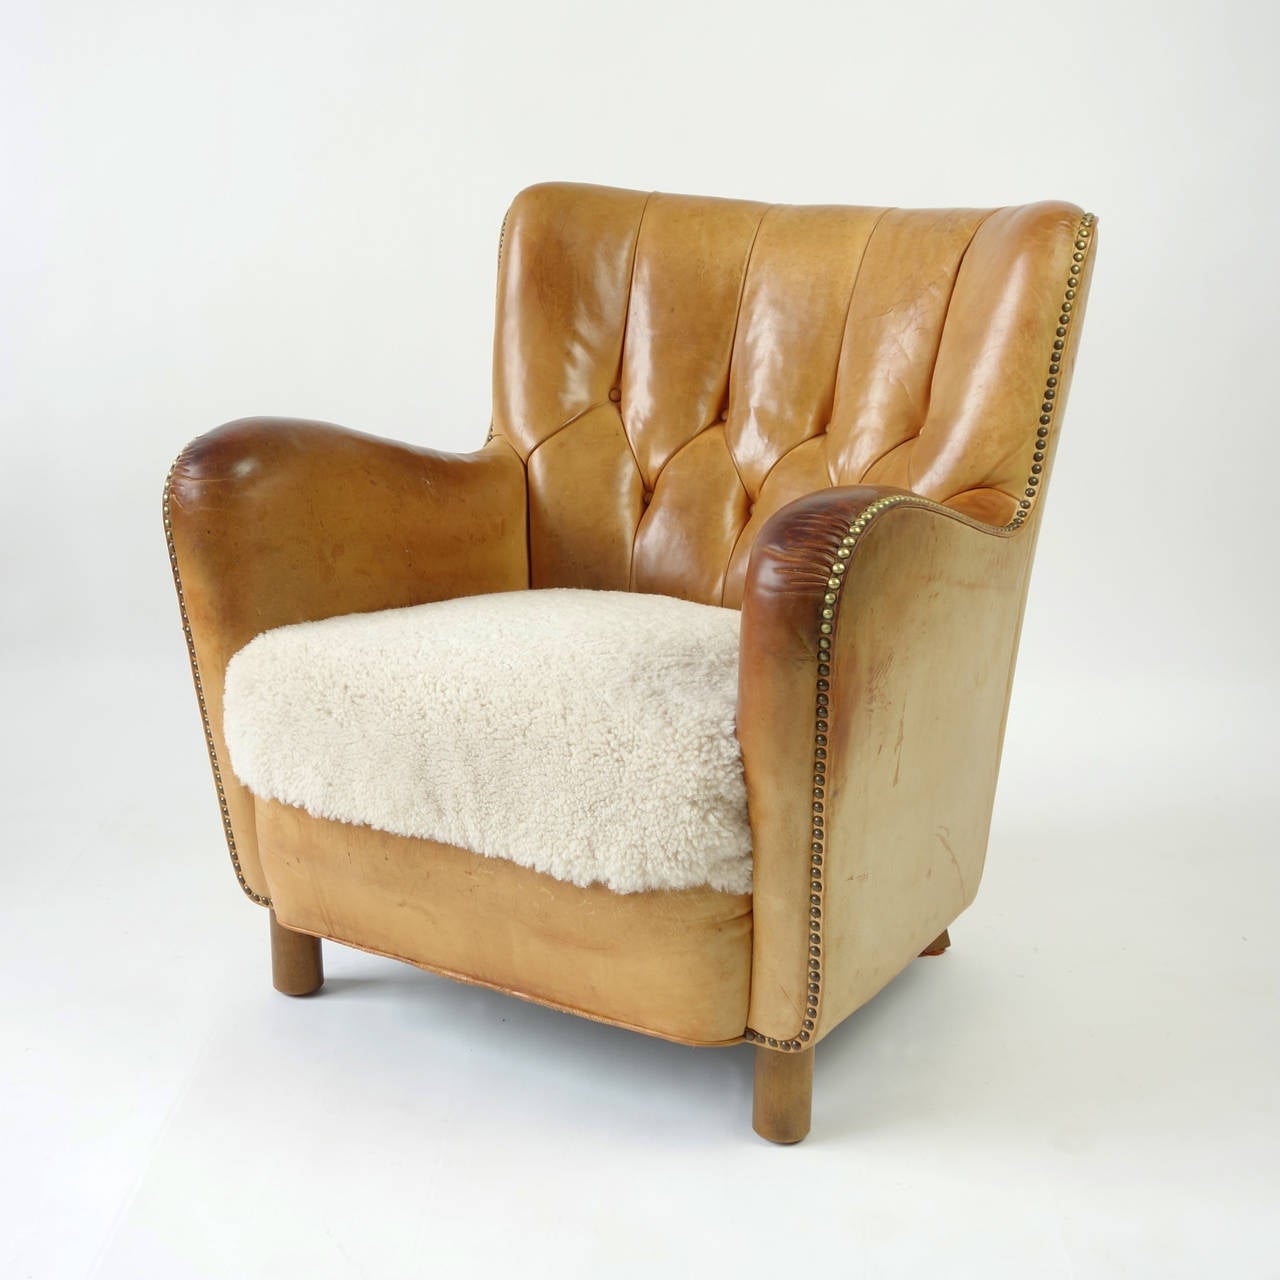 The original leather has achieved a gorgeous pale cognac color, and remains supple under the hand. The seat is upholstered in a dense shearling.